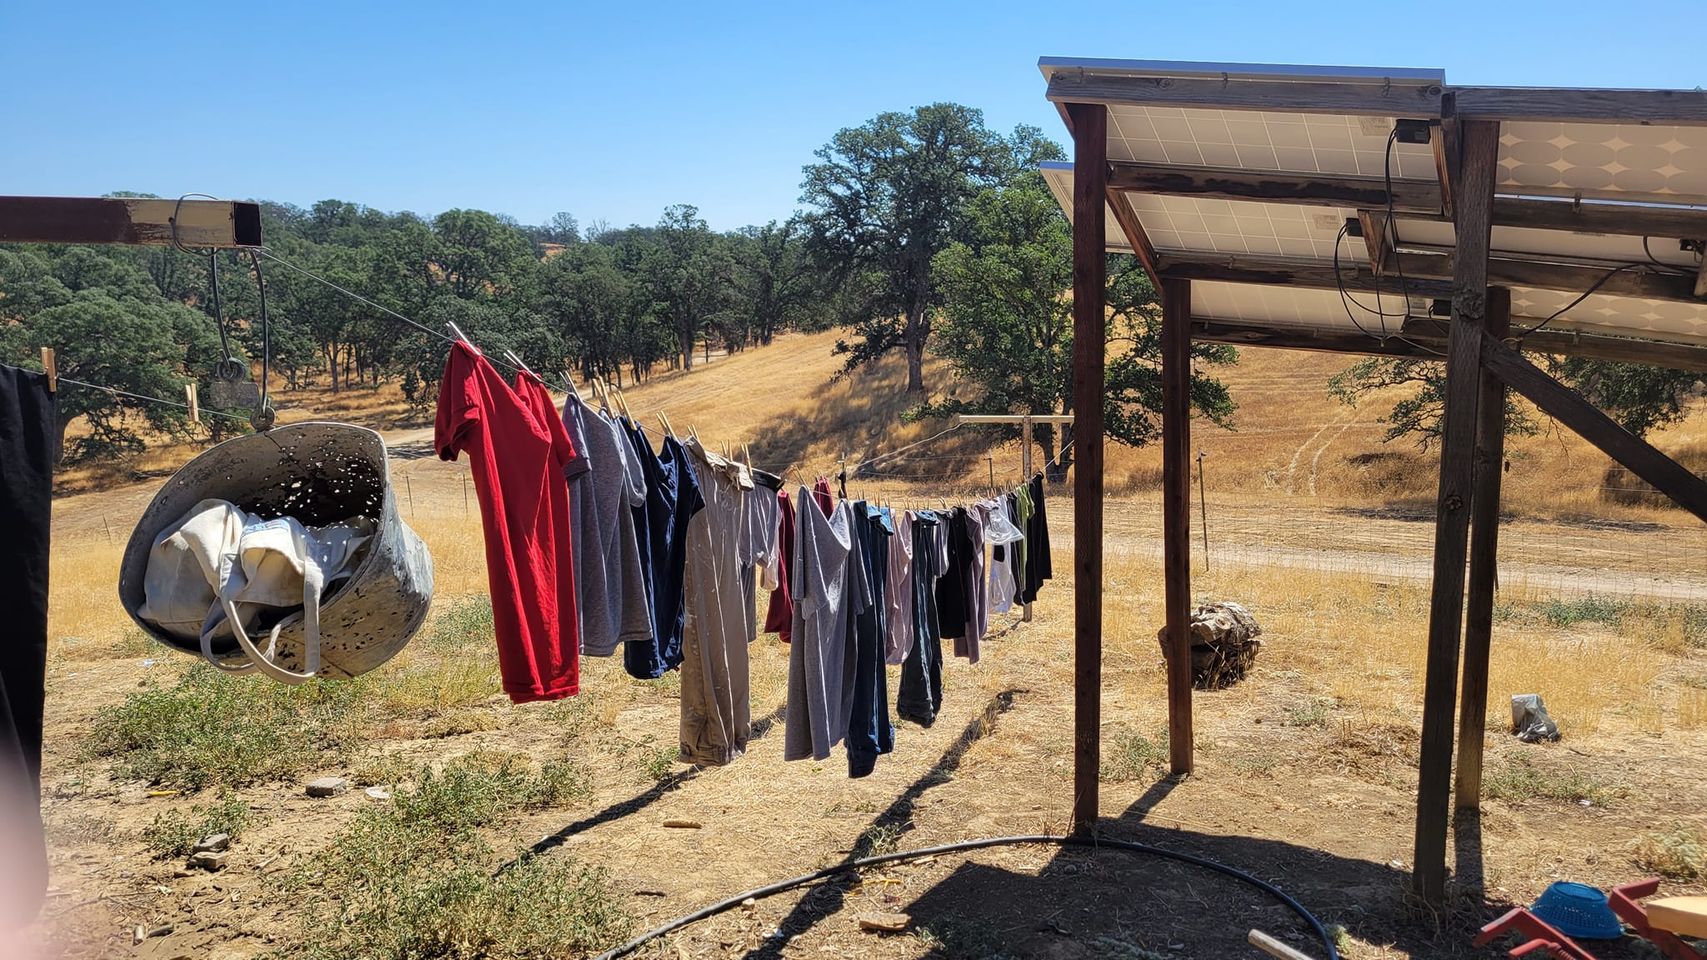 Clothes drying on the line